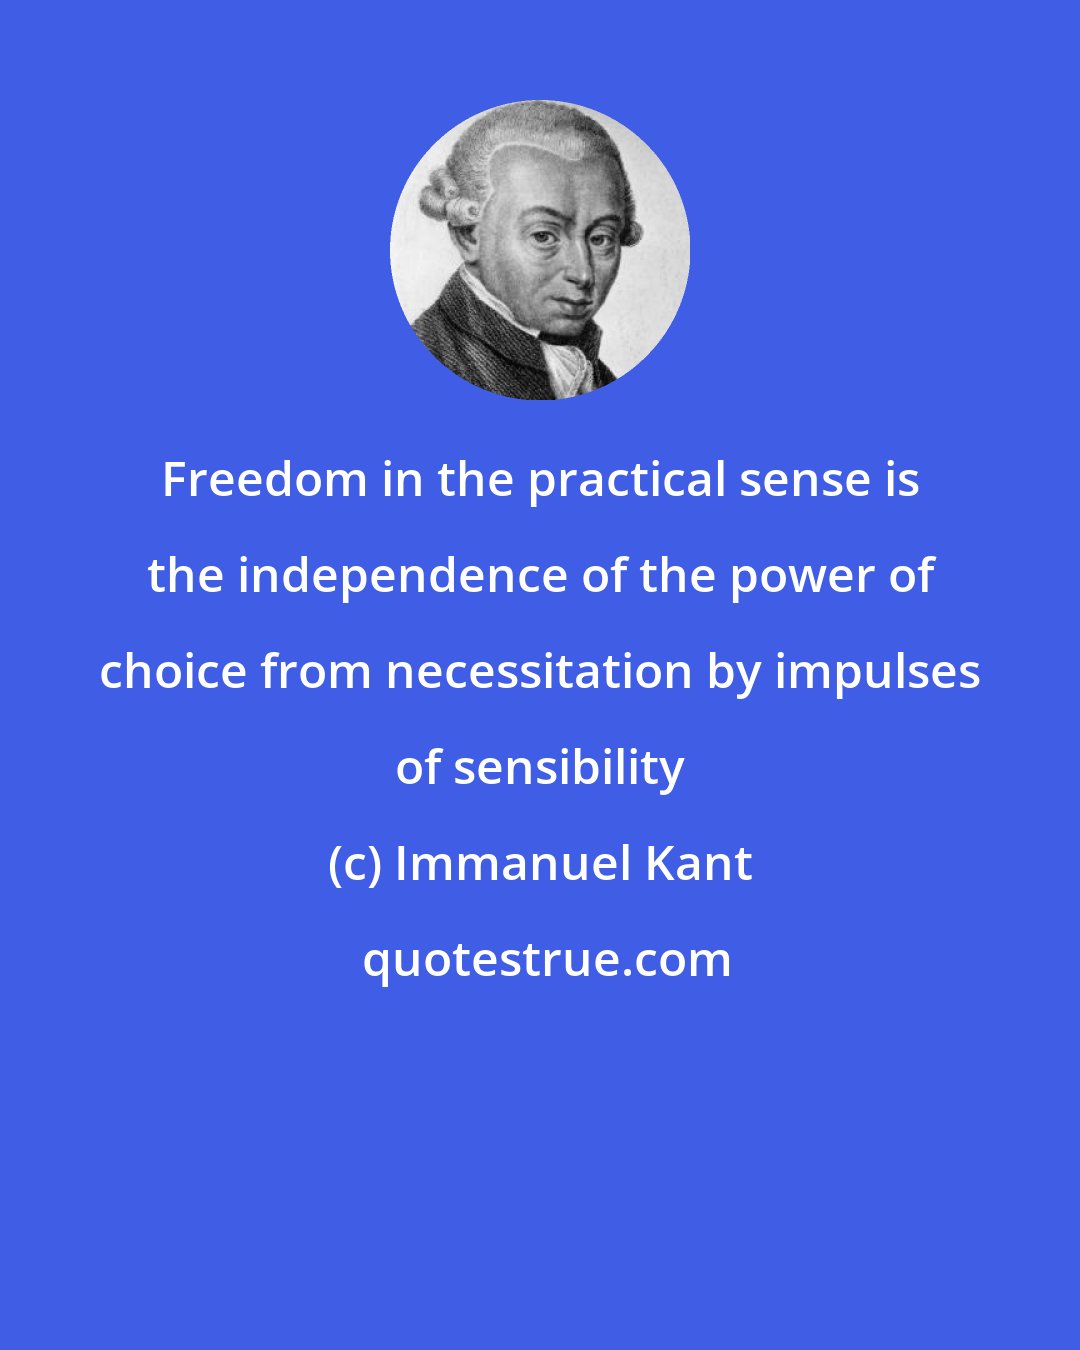 Immanuel Kant: Freedom in the practical sense is the independence of the power of choice from necessitation by impulses of sensibility